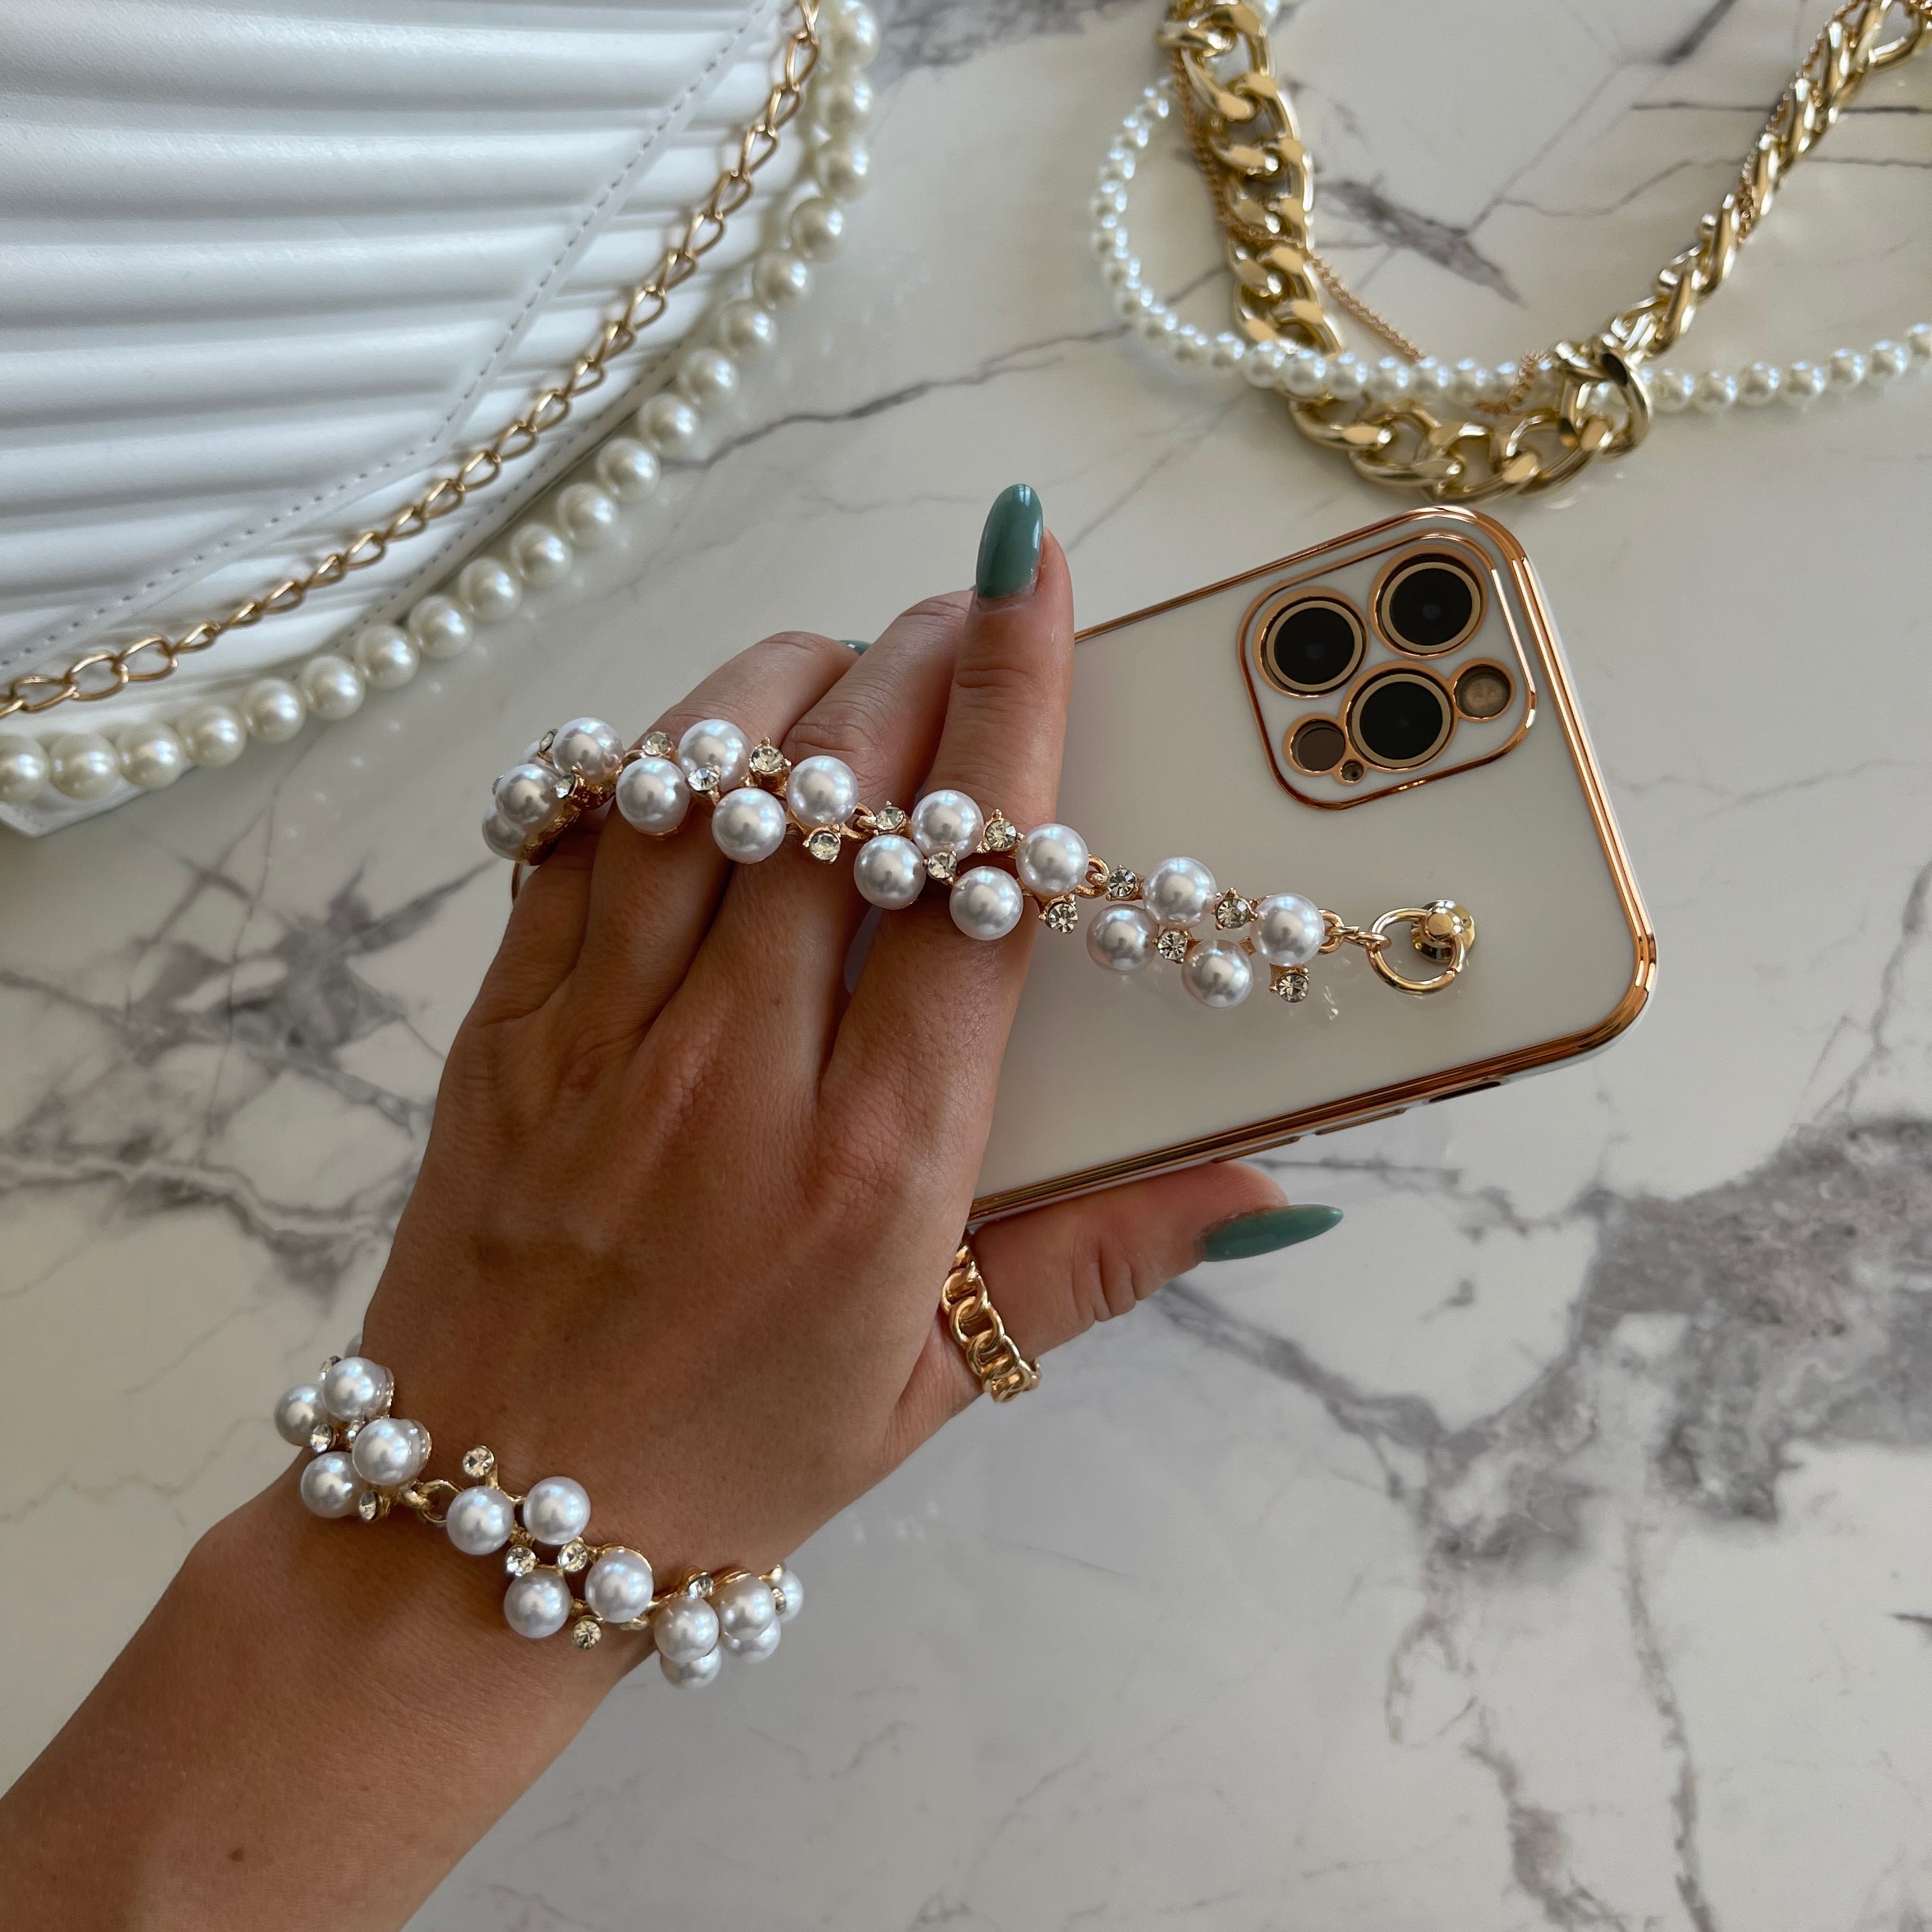 iPhone Case With Pearls Wrist Bracelet